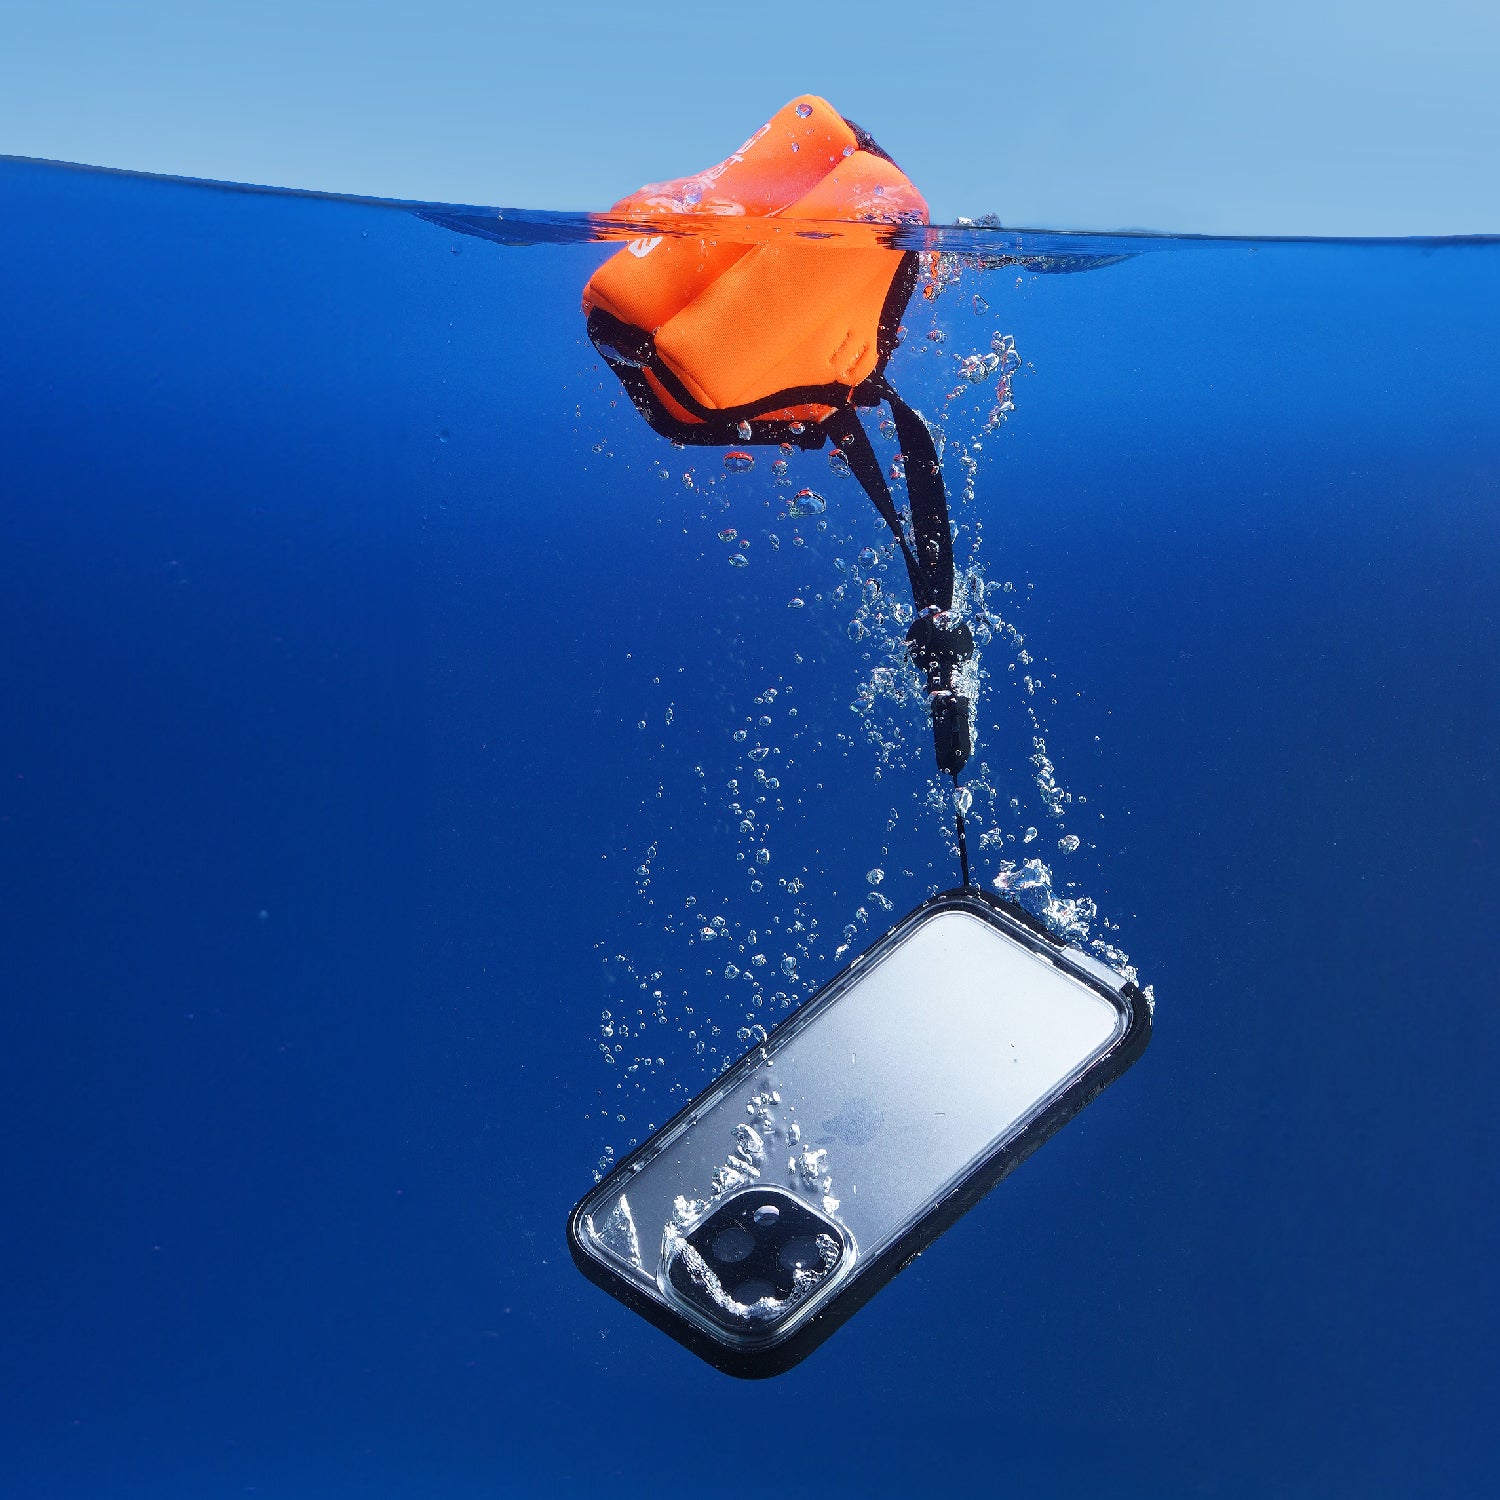 Catalyst Waterproof Case Total Protection iphone 14 series showing the case submerged underwater with orange floating lanyard installed